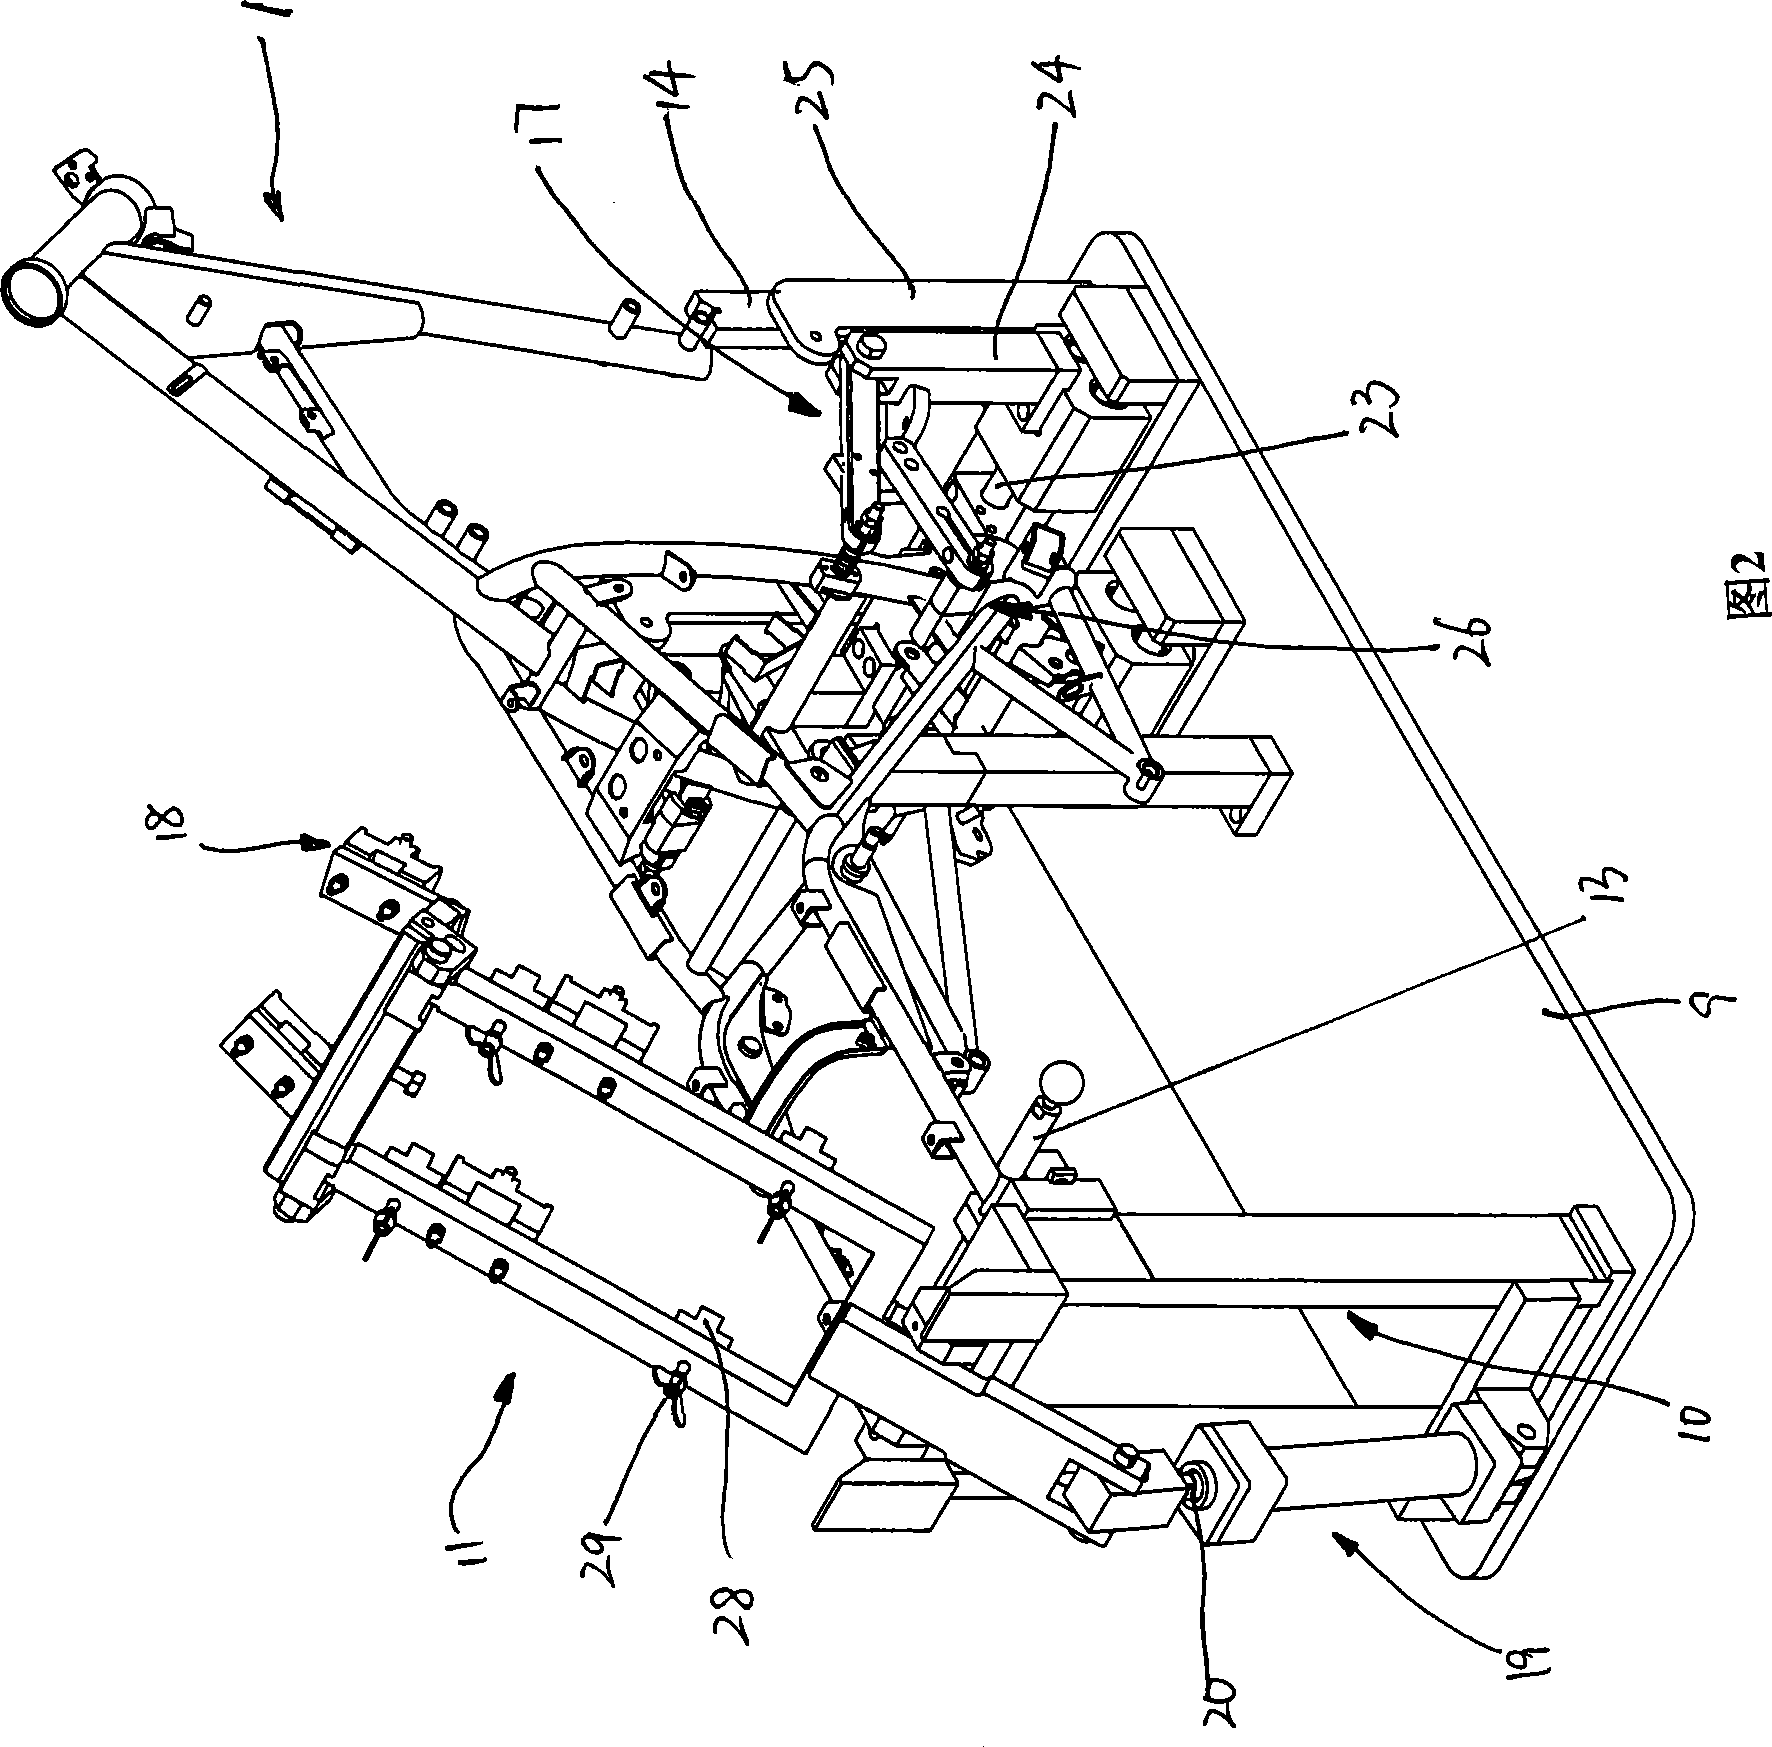 Welding clamp for vehicle frame parts and components